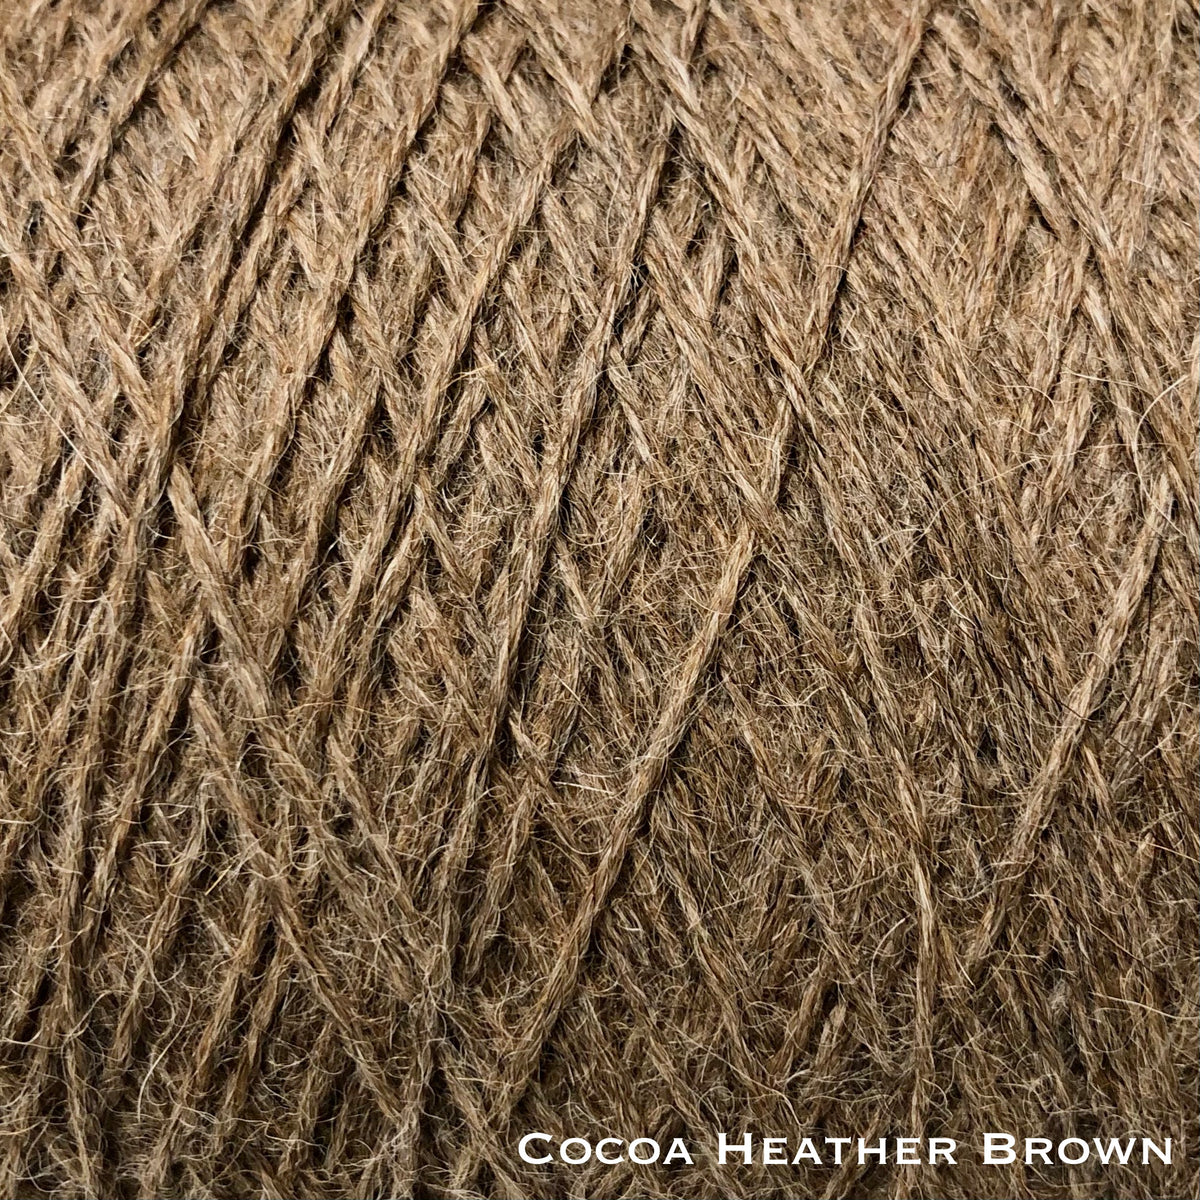 cocoa heather brown sport weight alpaca wool yarn for knitting and crochet